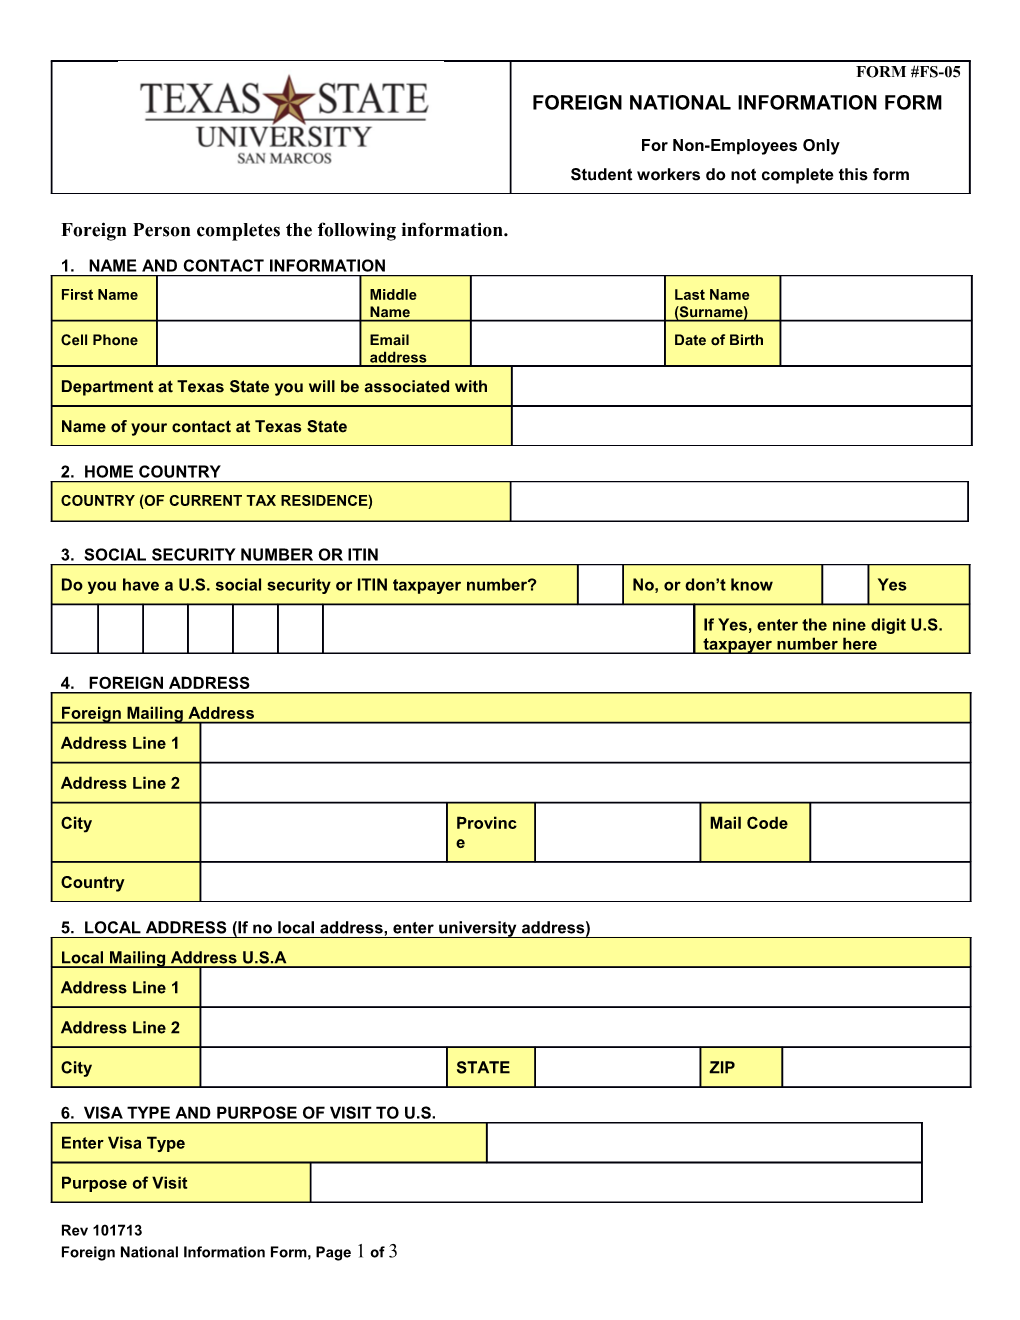 Foreign National Information Form (Page 1)